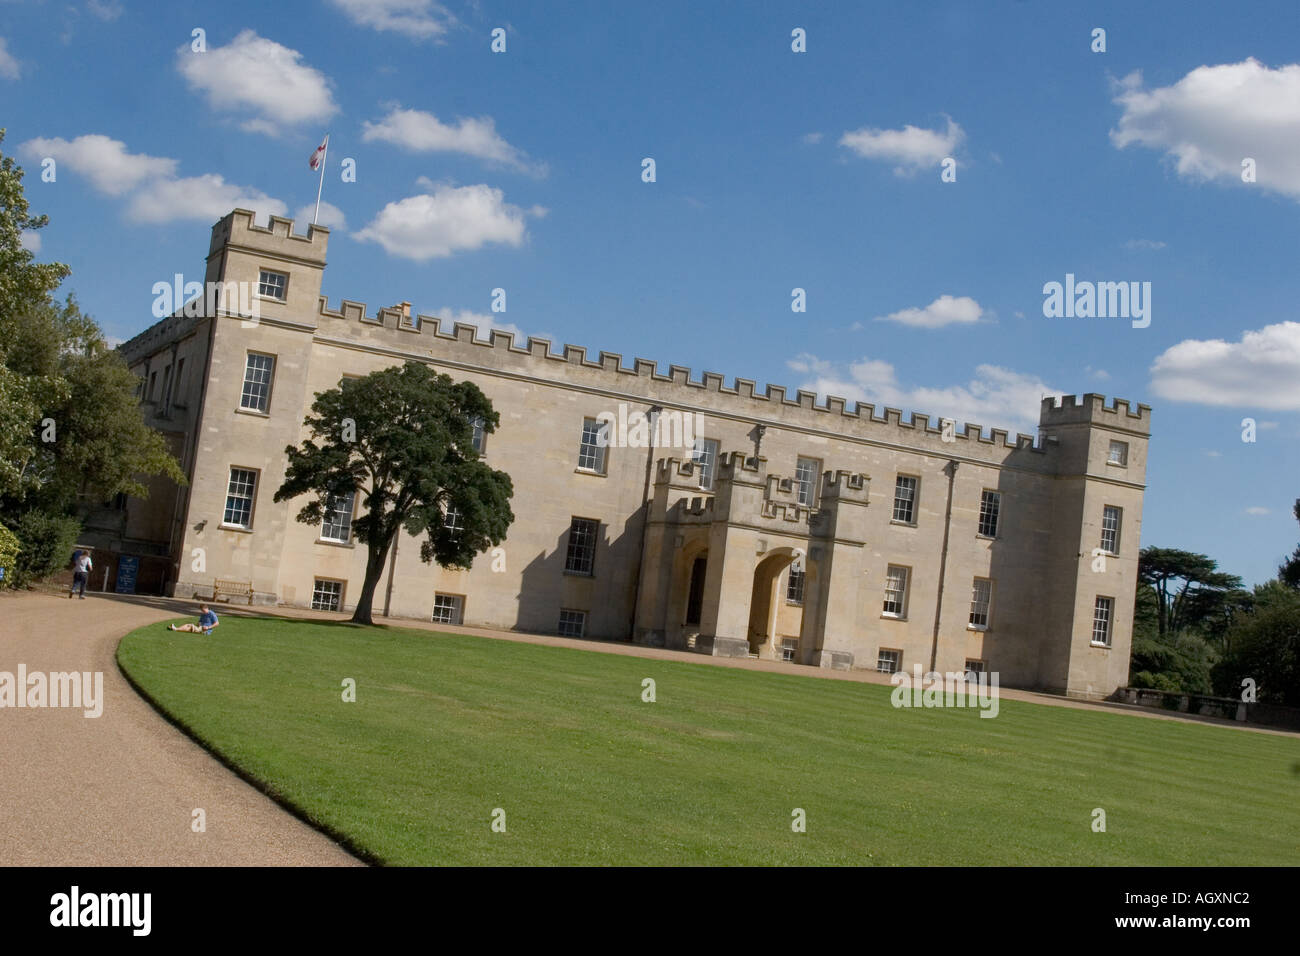 Exterior of Syon House London Home of the Duke of Northumberland Stock Photo